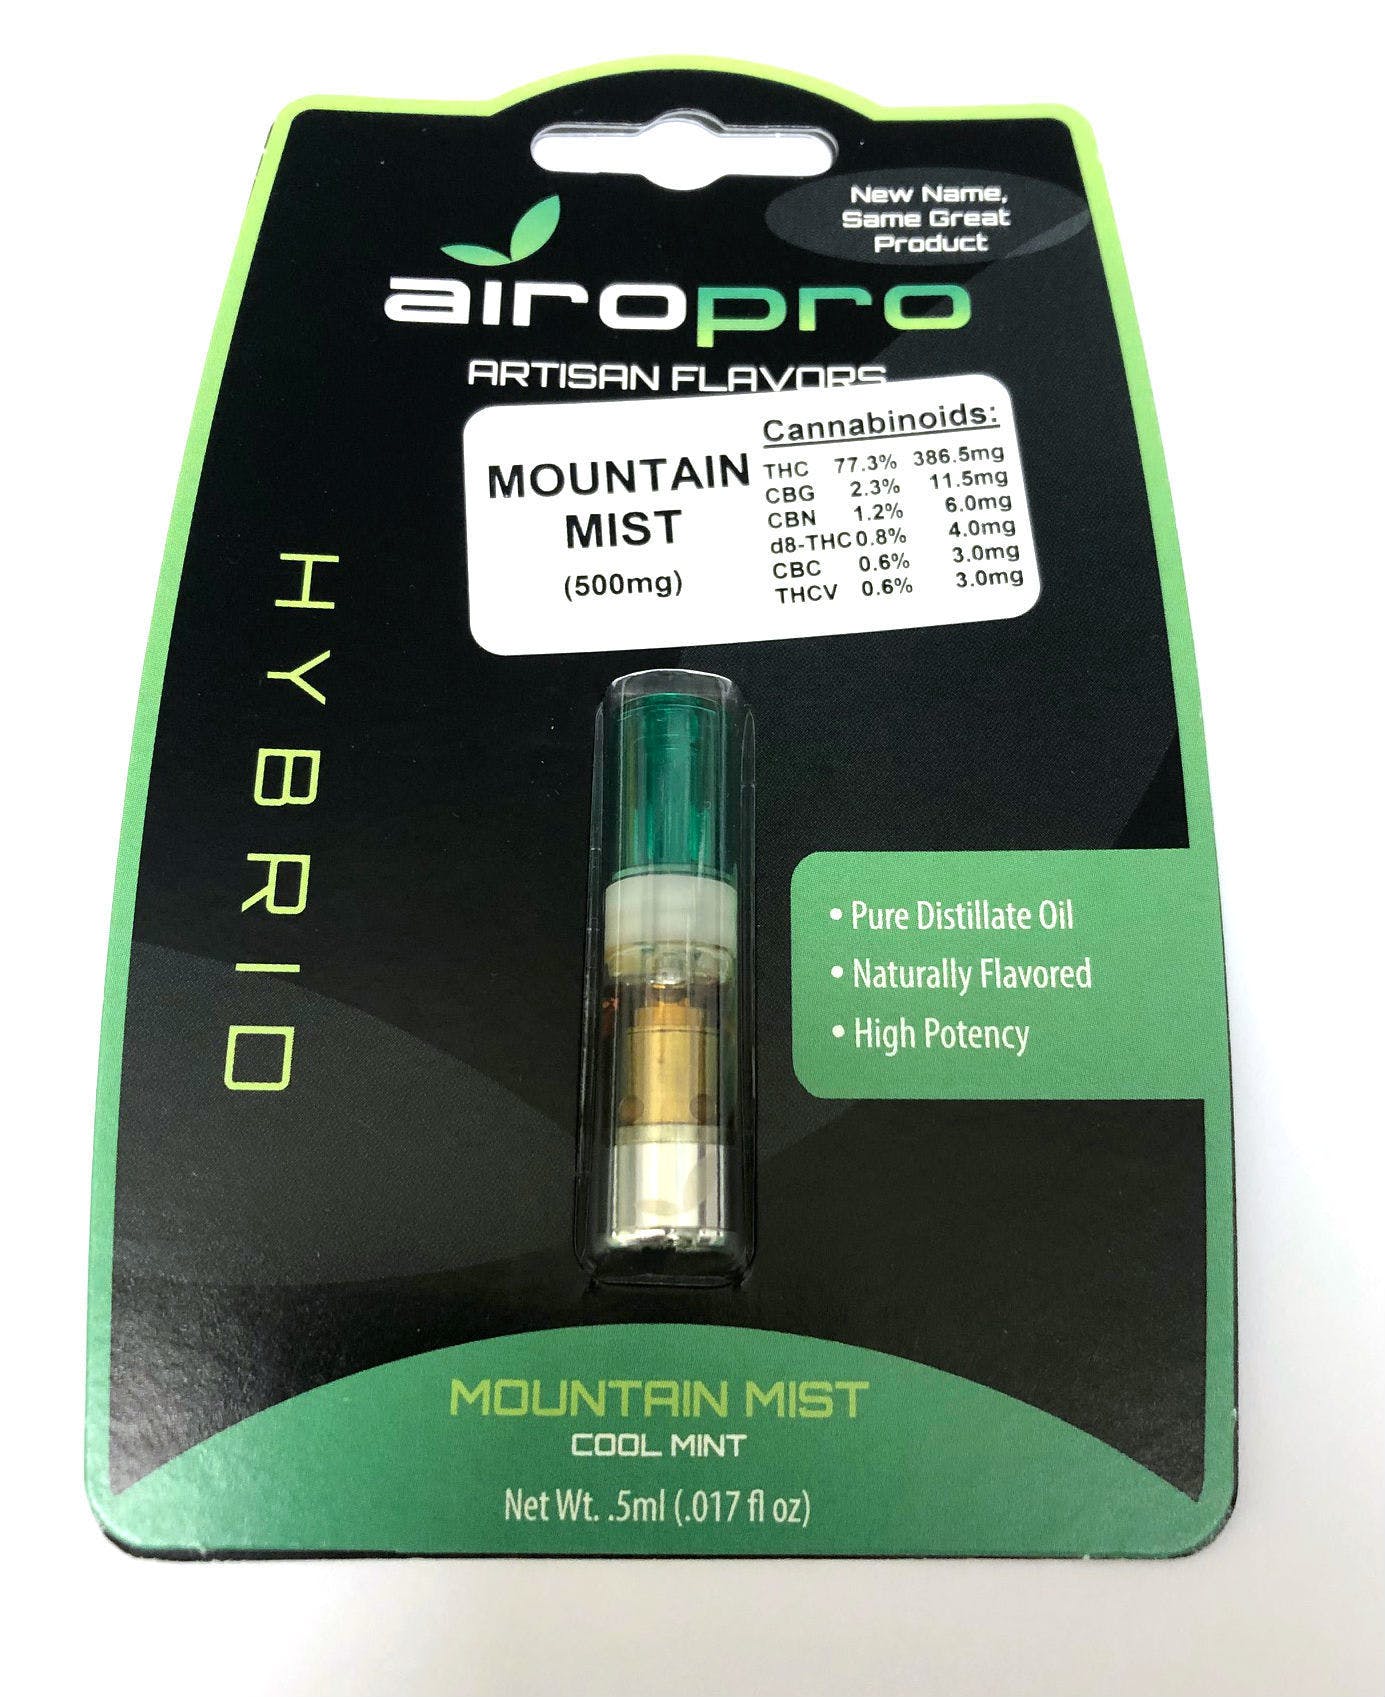 concentrate-airopro-artisan-flavors-mountain-mist-distillate-cartridge